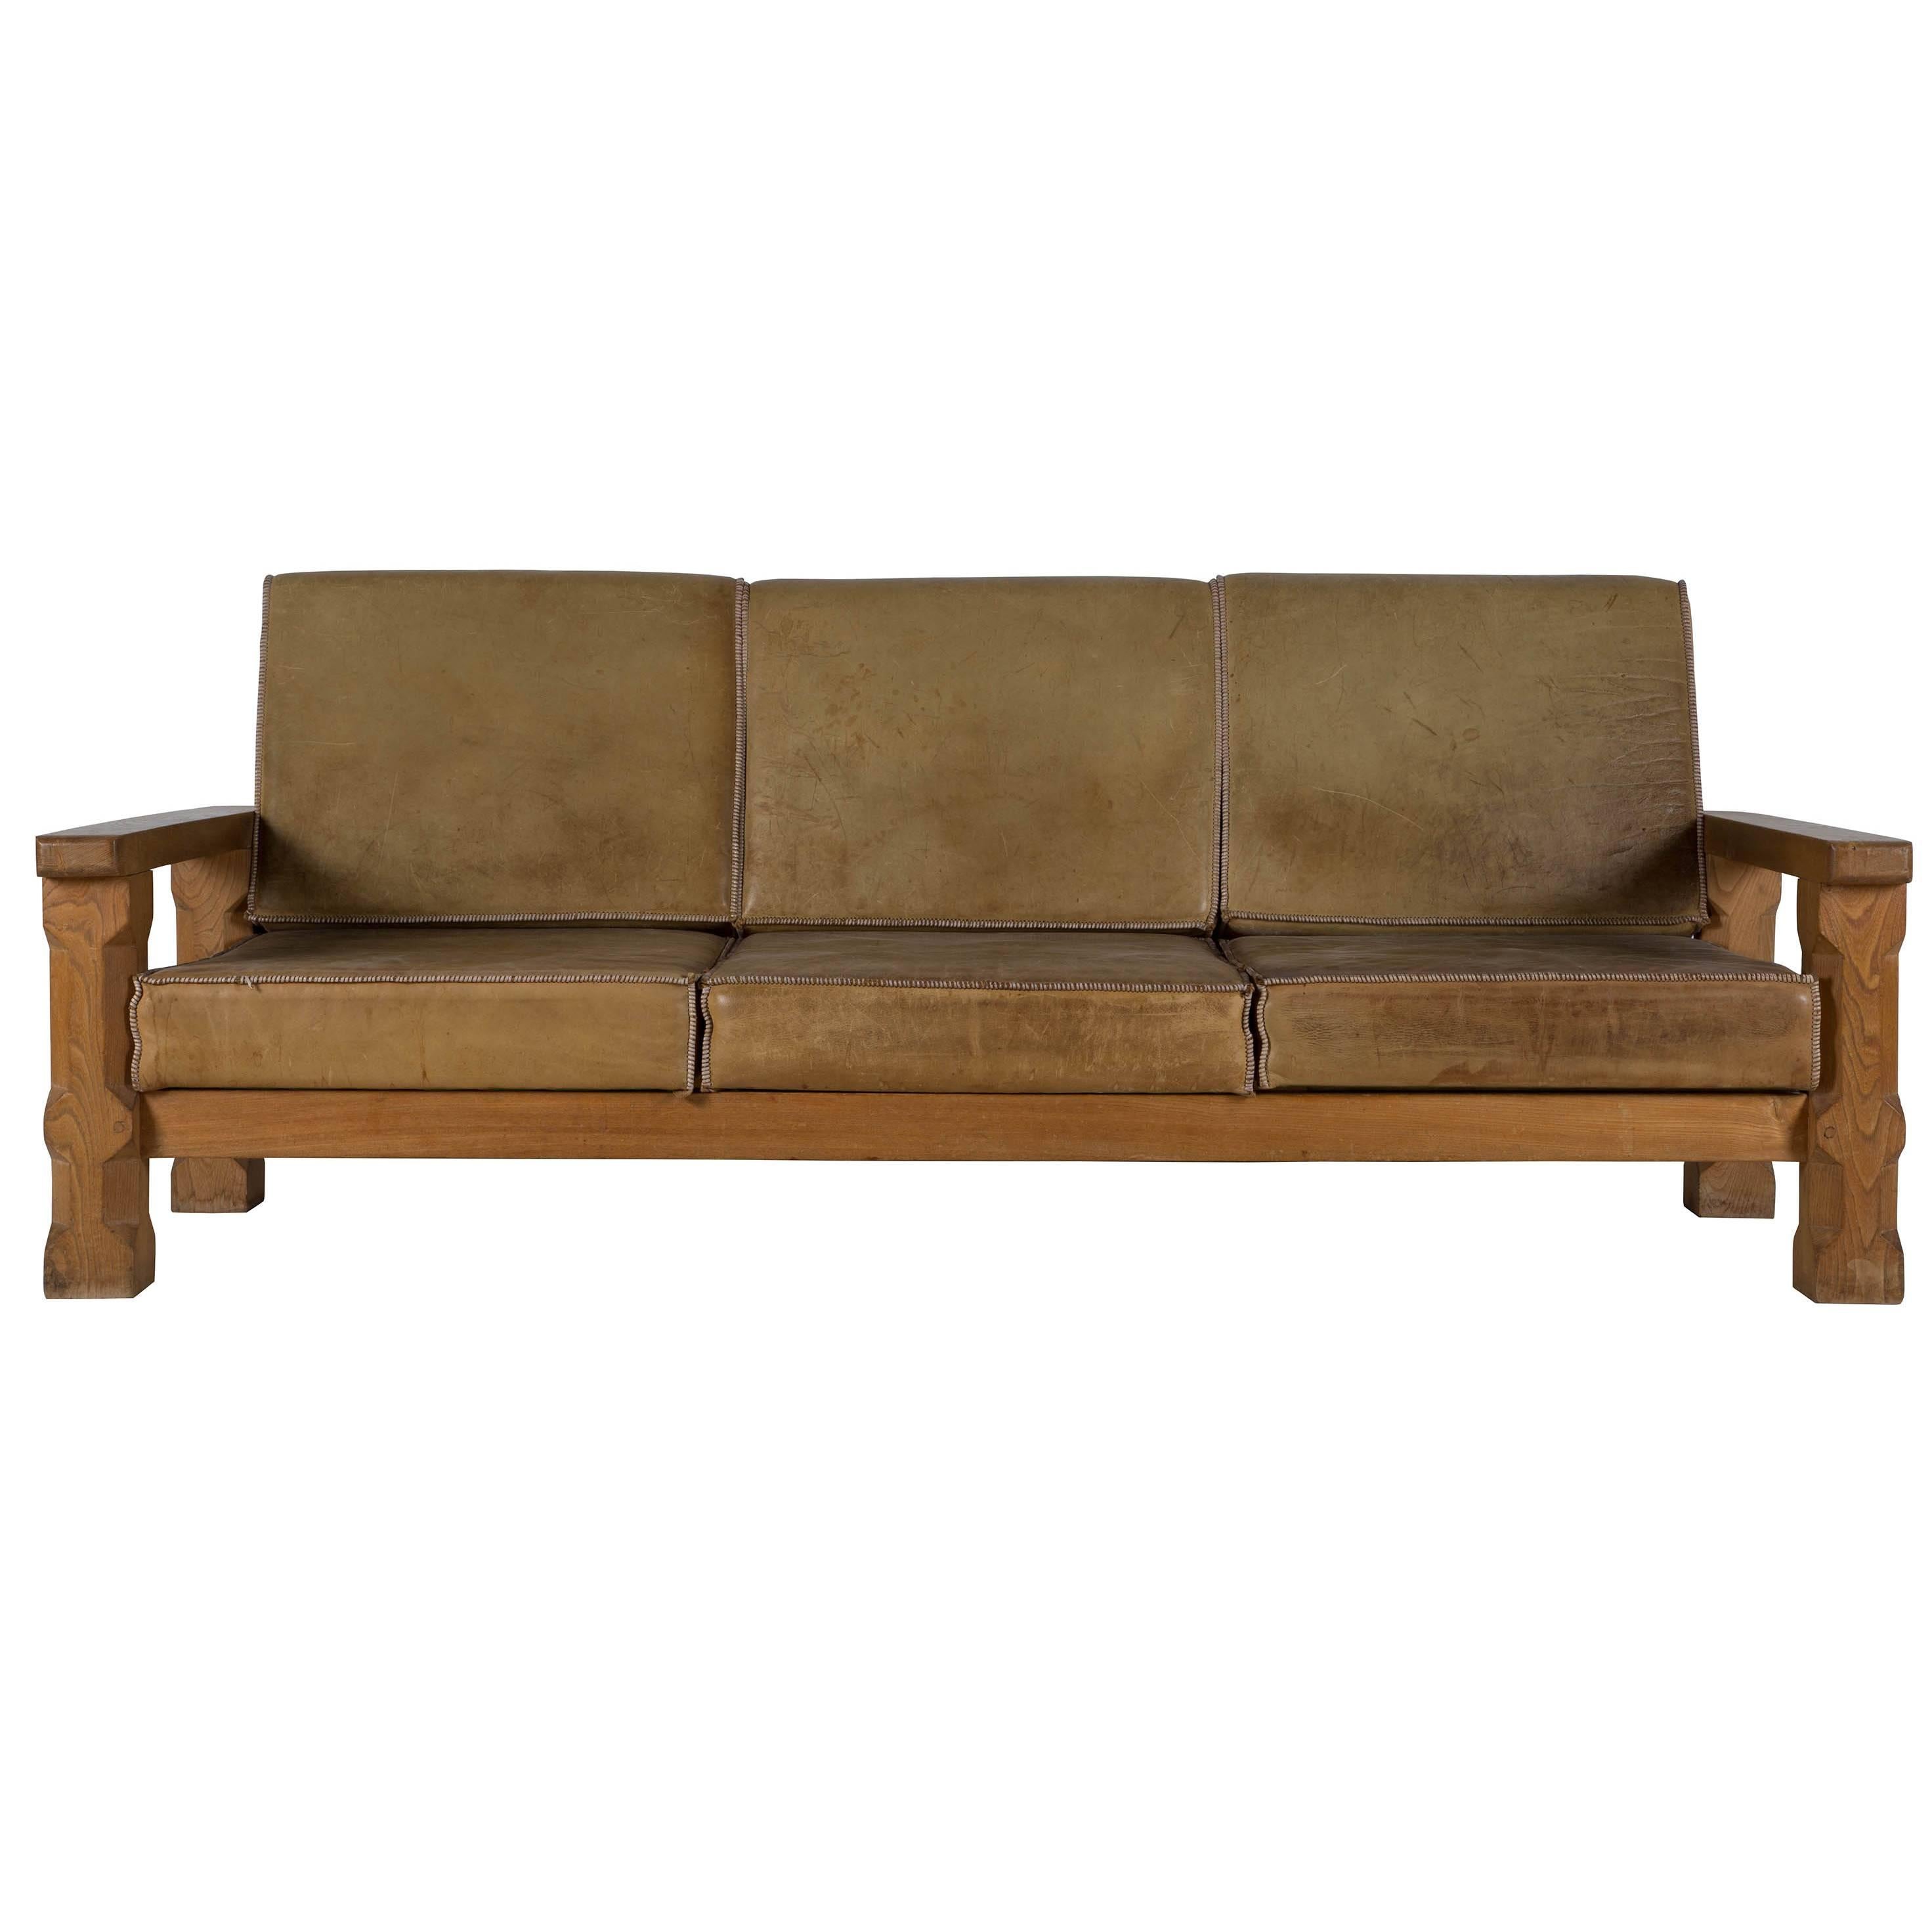 Oak and Leather Arts and Crafts Sofa